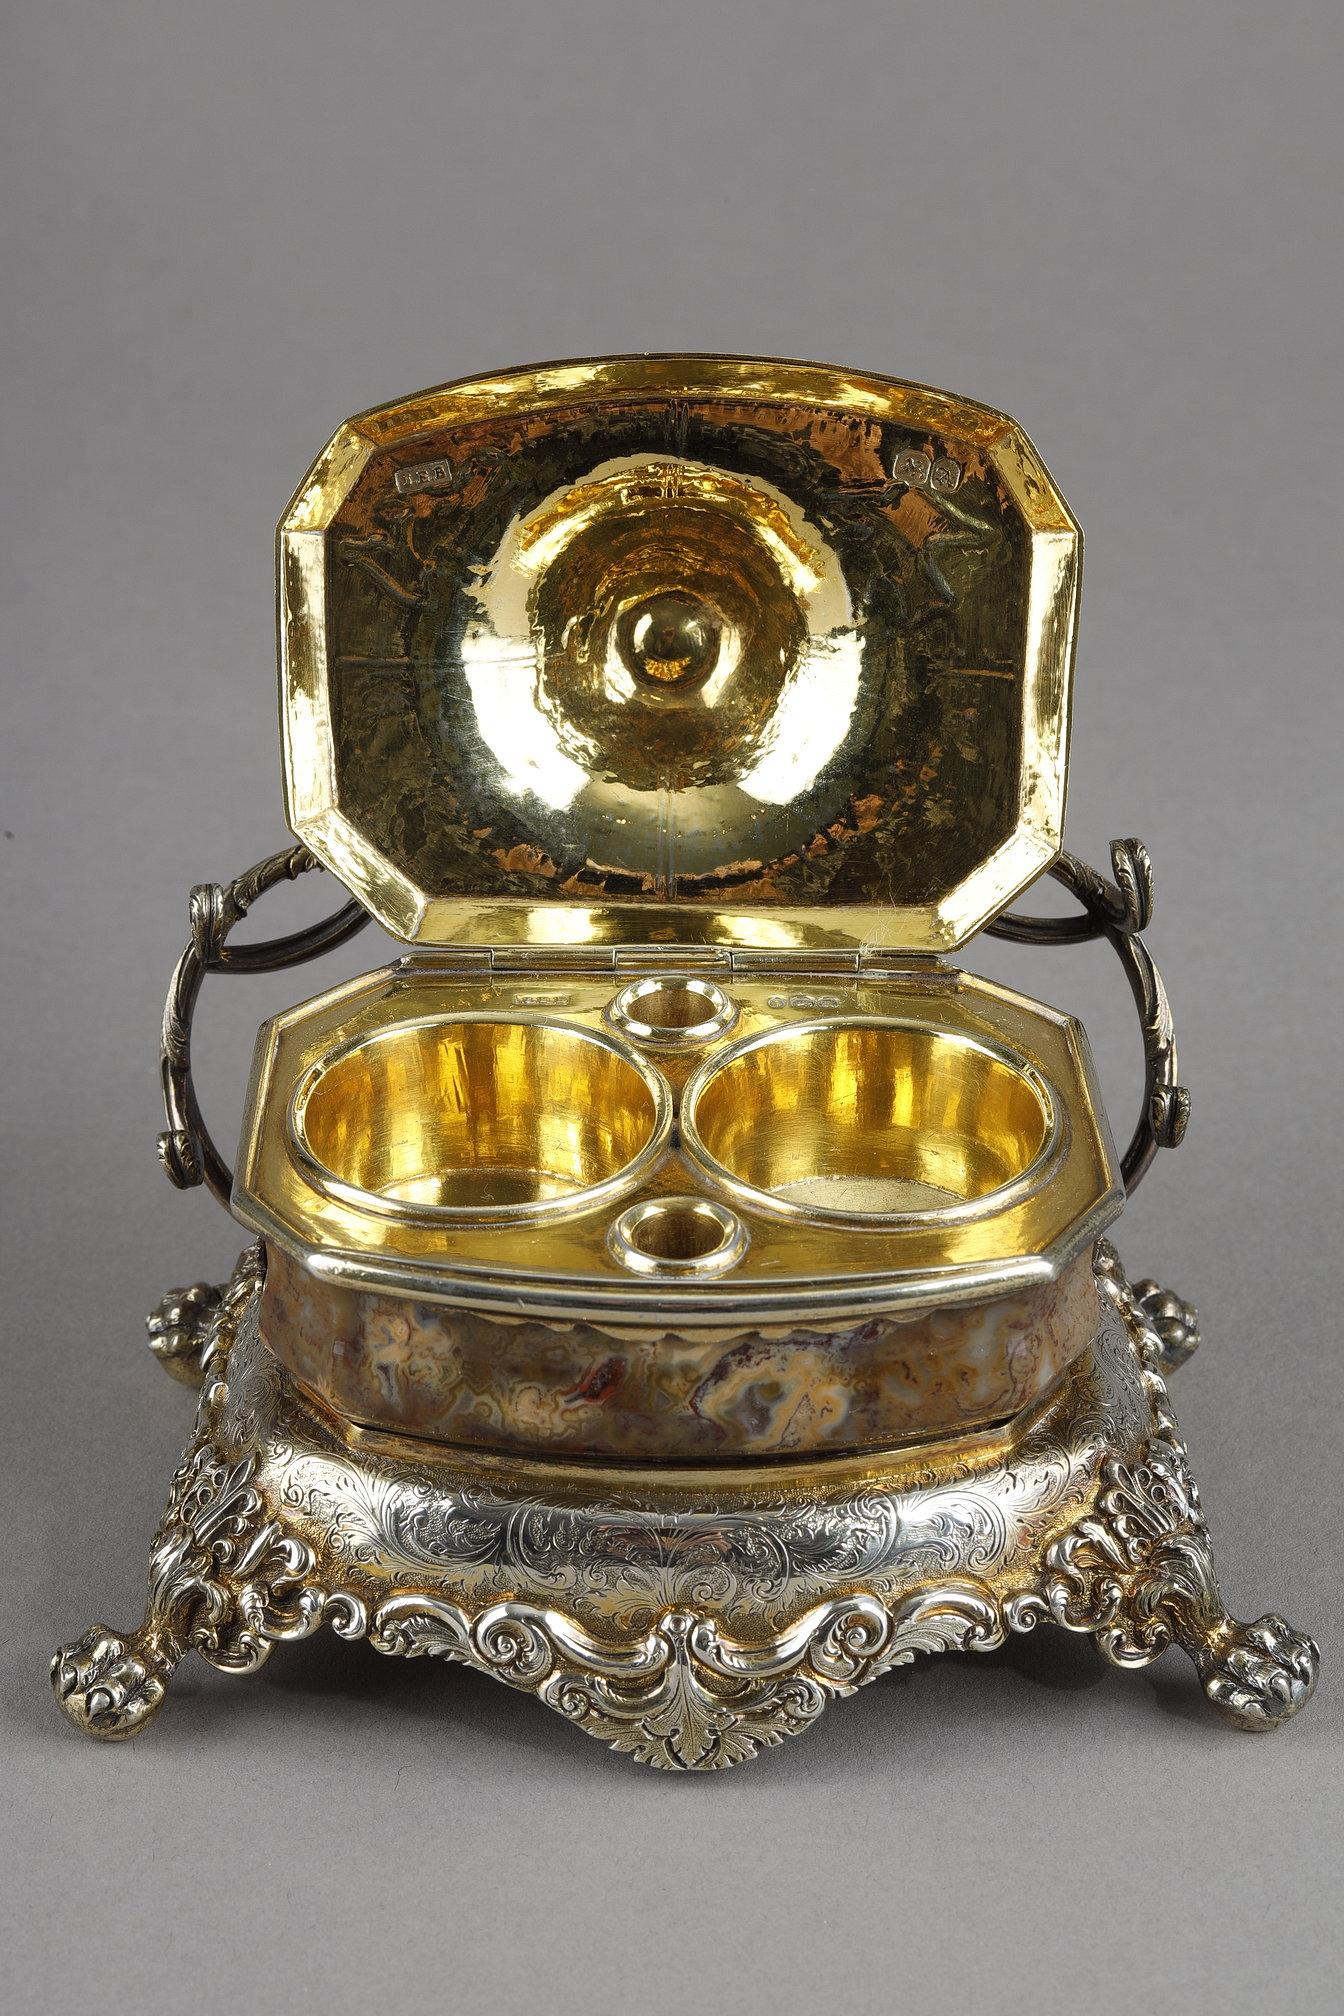 English Silver-Gilt and Agate Inkstand, circa 1830 For Sale 13